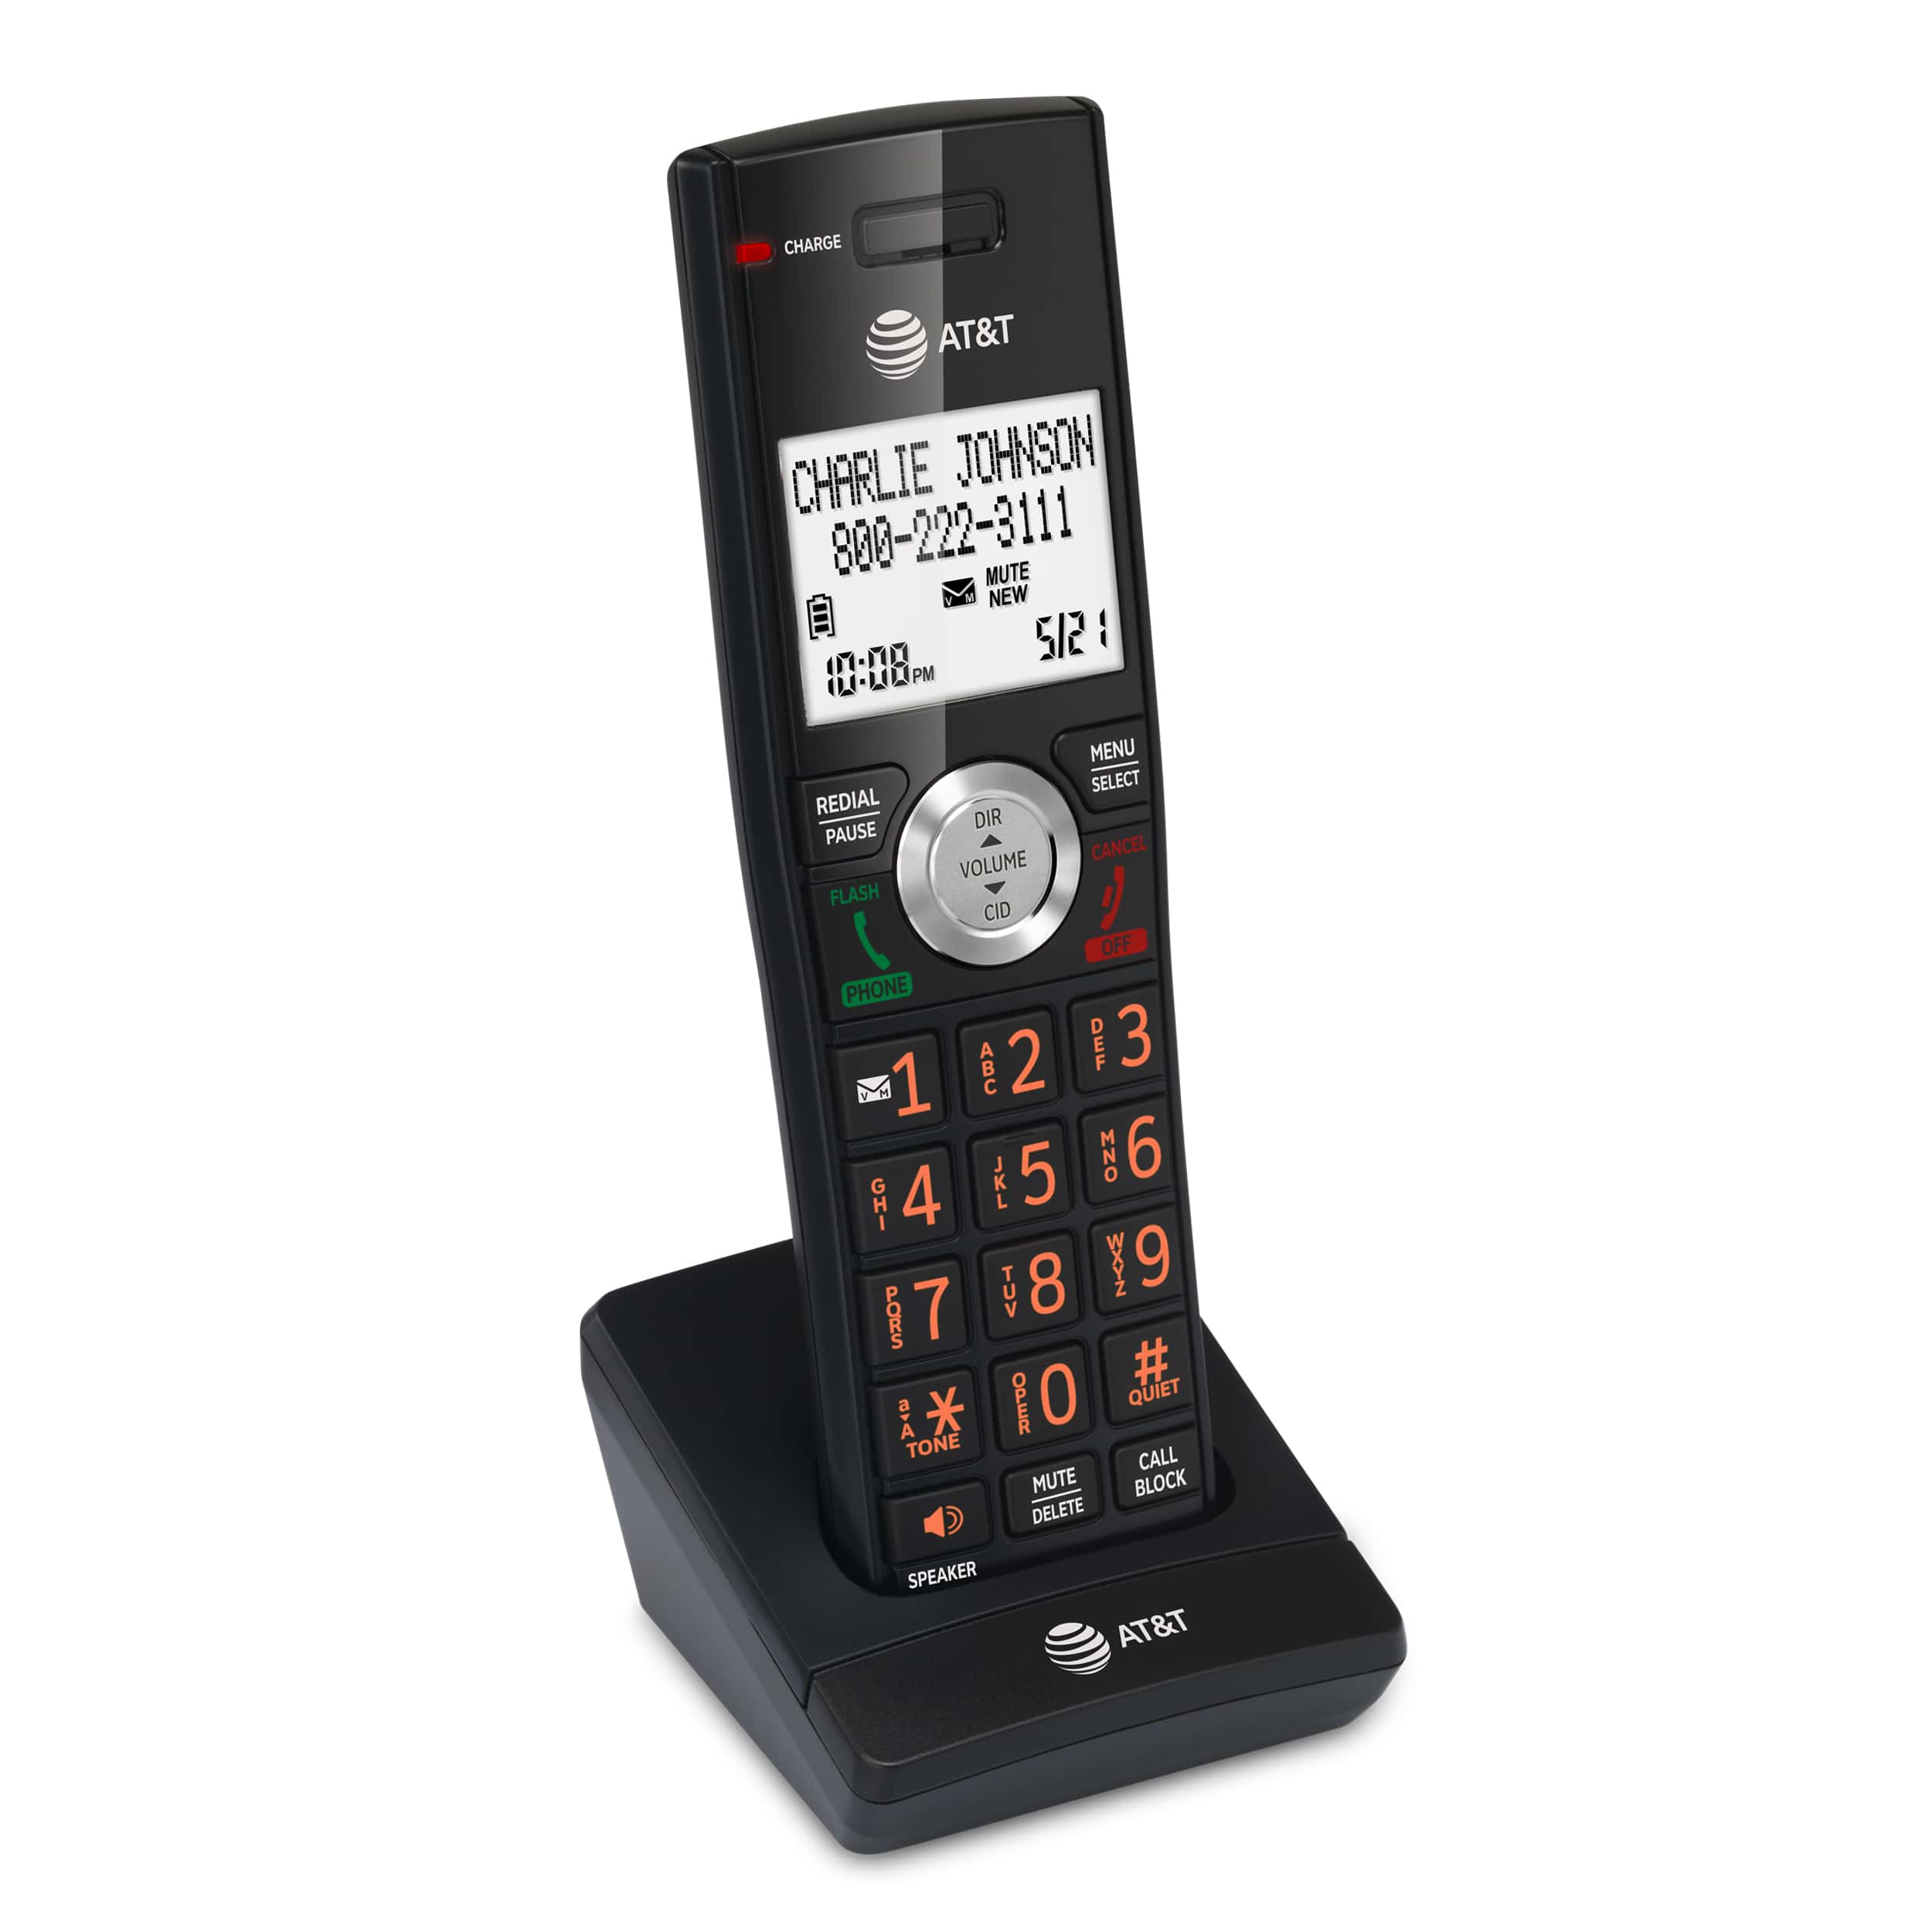 6 handset phone system with smart call blocker - view 20